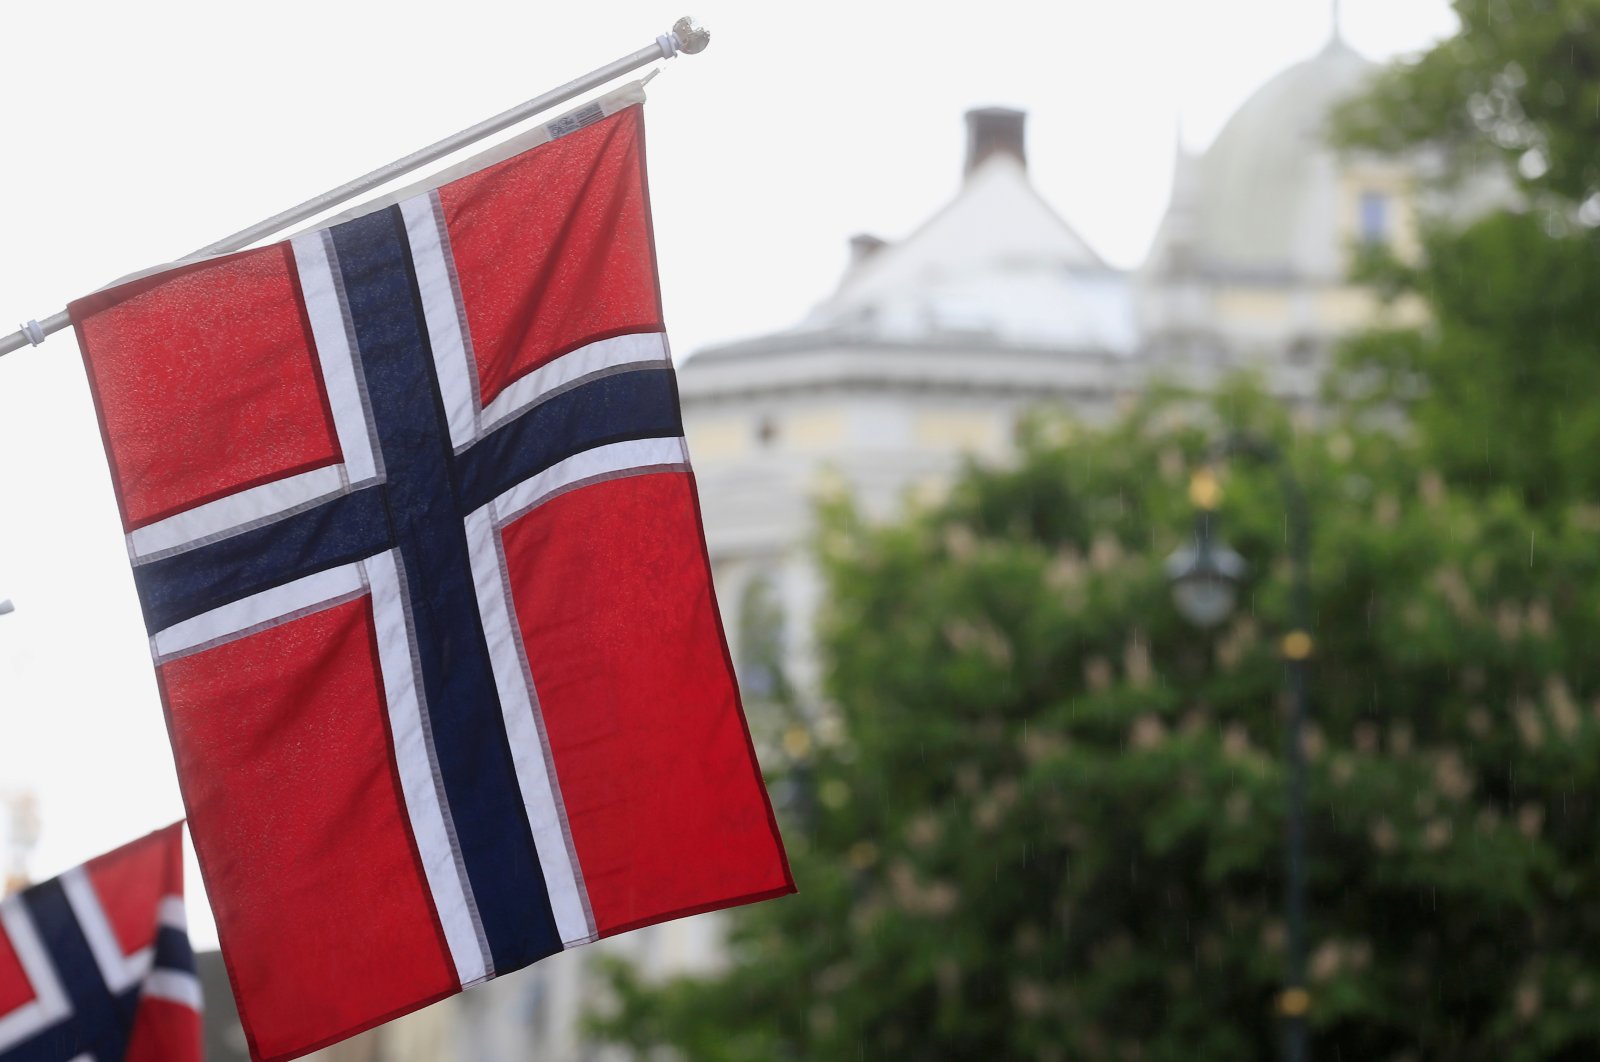 Norwegian flags flutter at Karl Johans street in Oslo, Norway, May 31, 2017. (Reuters Photo)